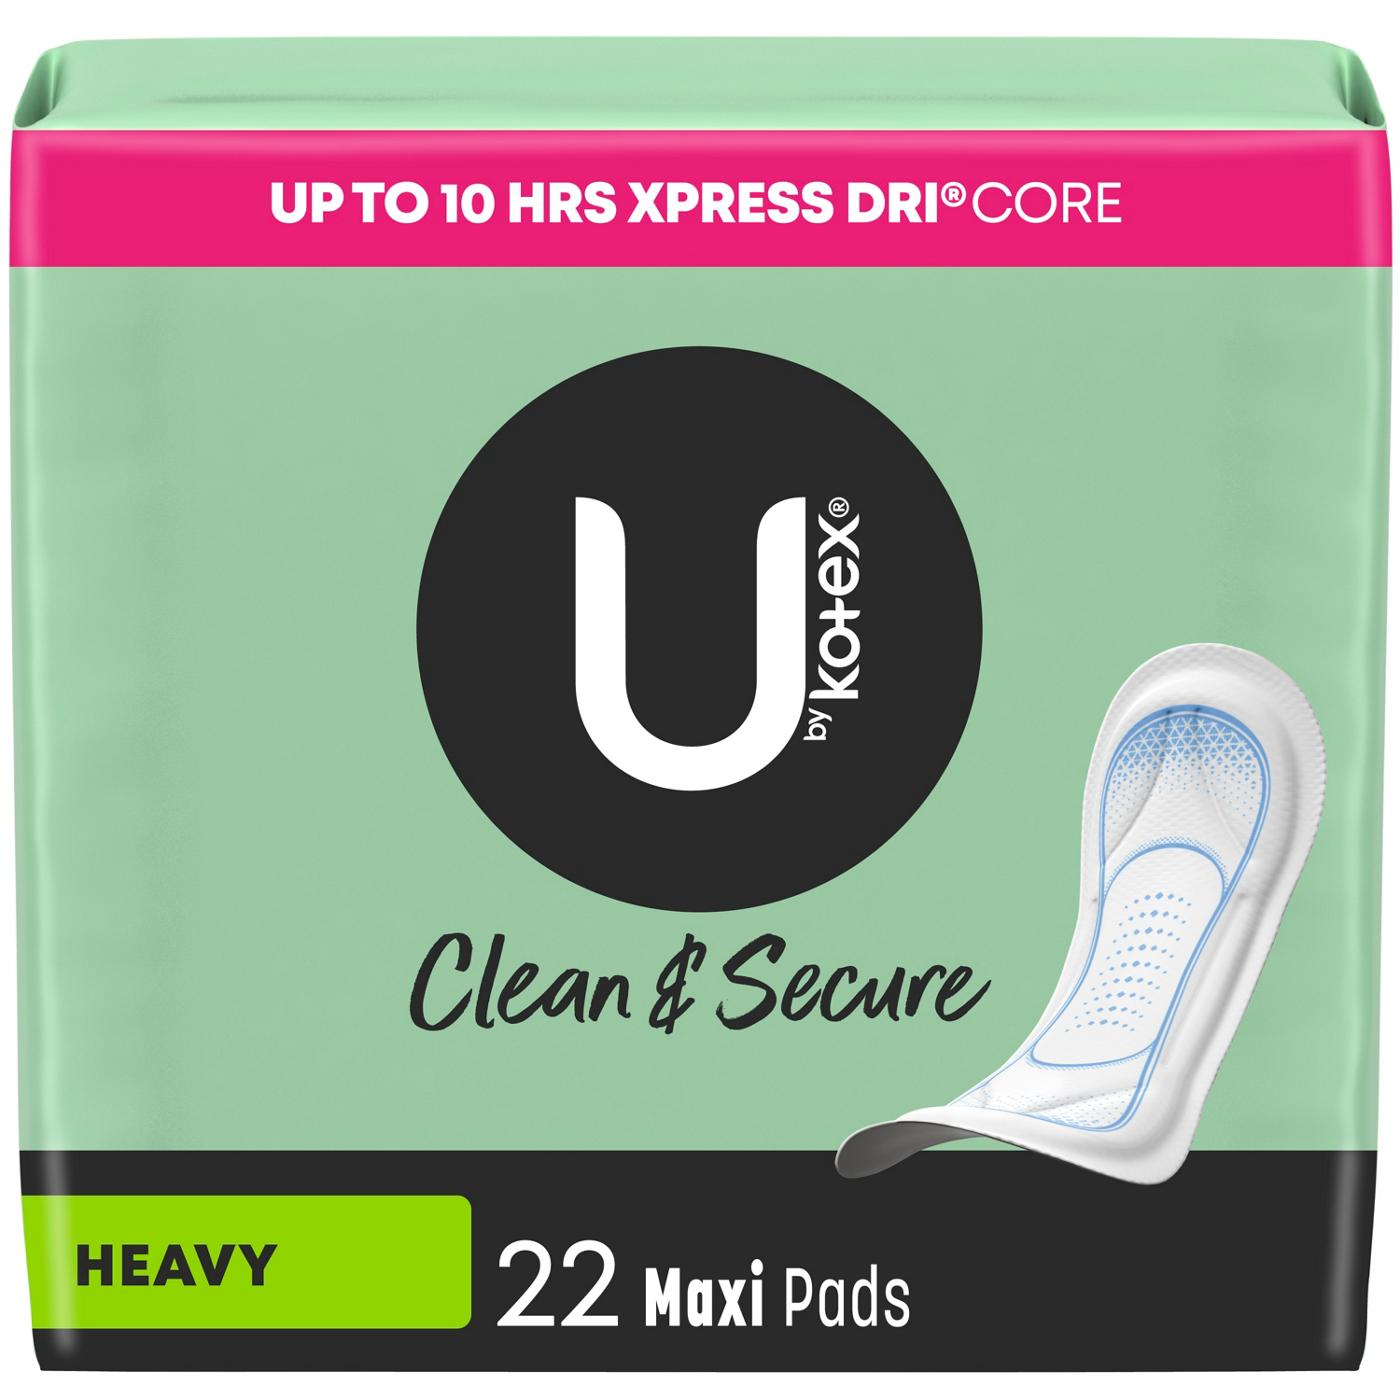 U by Kotex Clean & Secure Maxi Pads - Heavy Absorbency; image 1 of 4